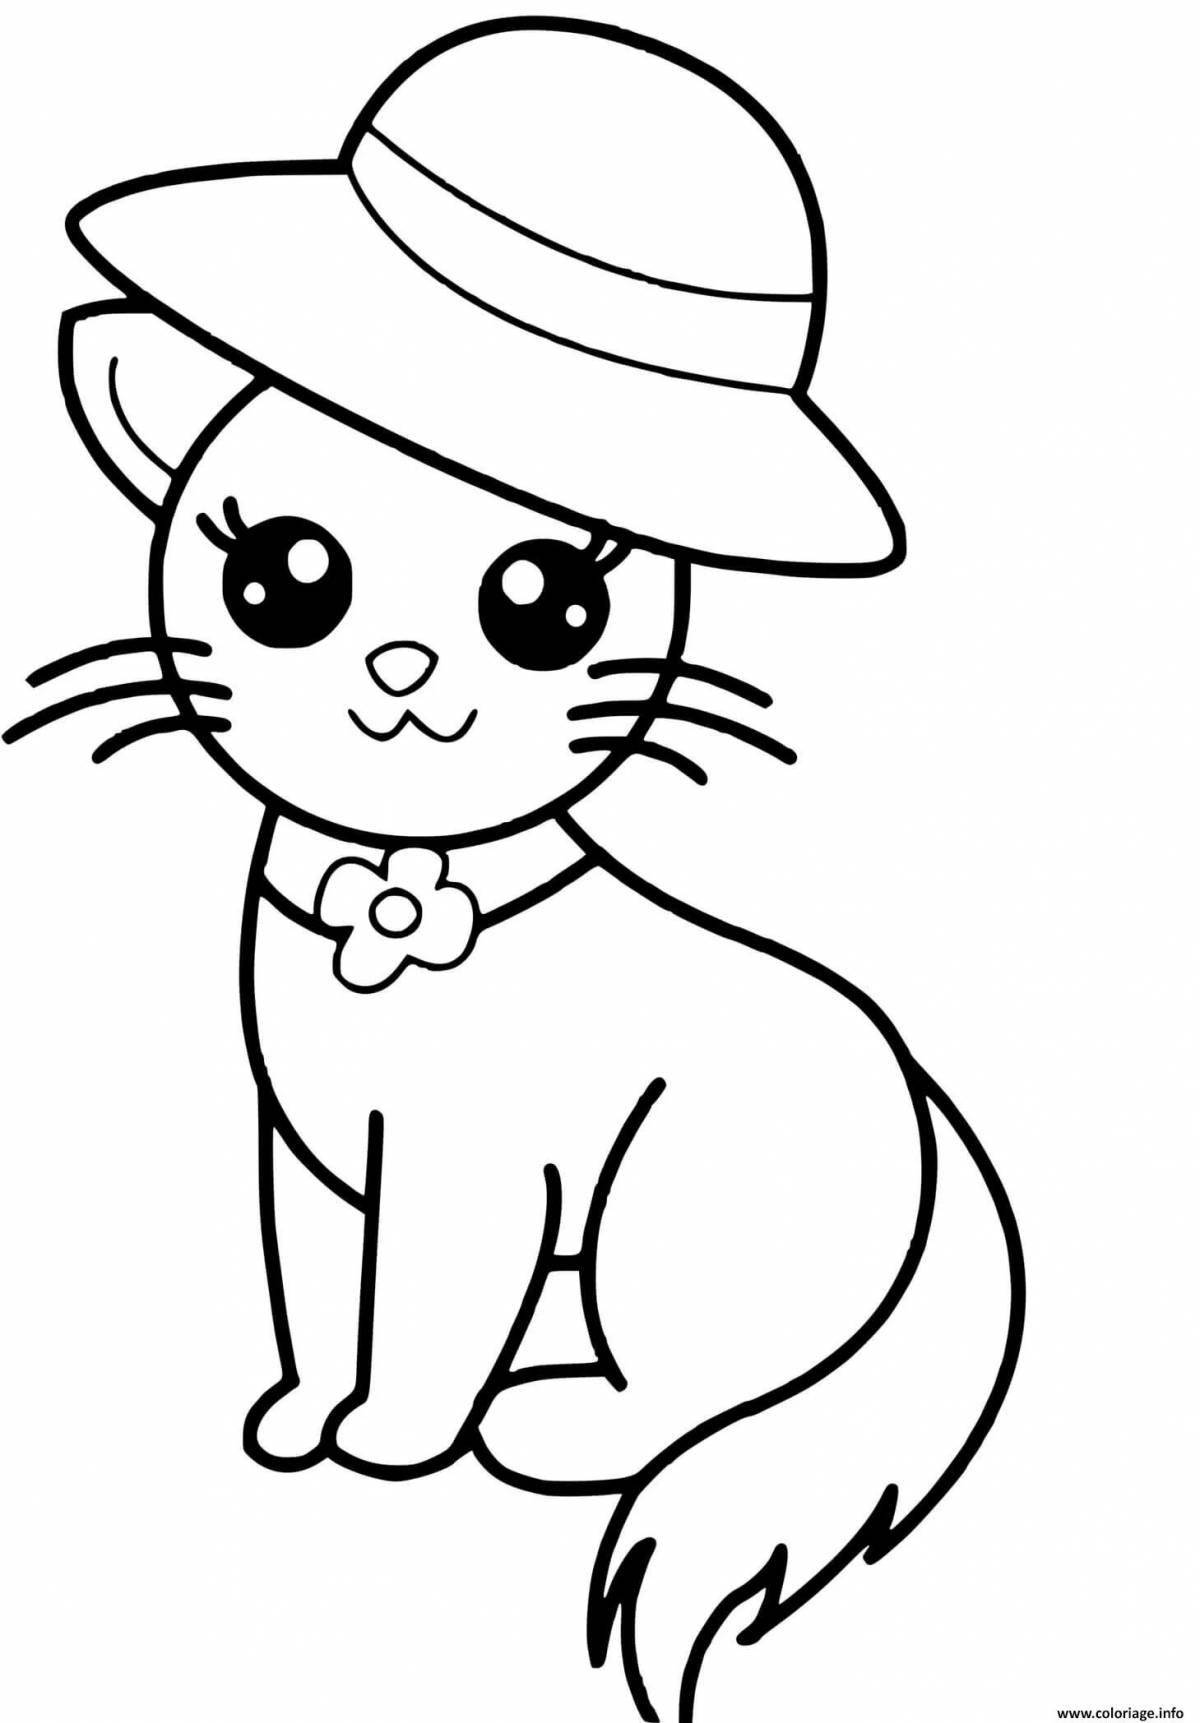 Fancy cat coloring book for 4-5 year olds